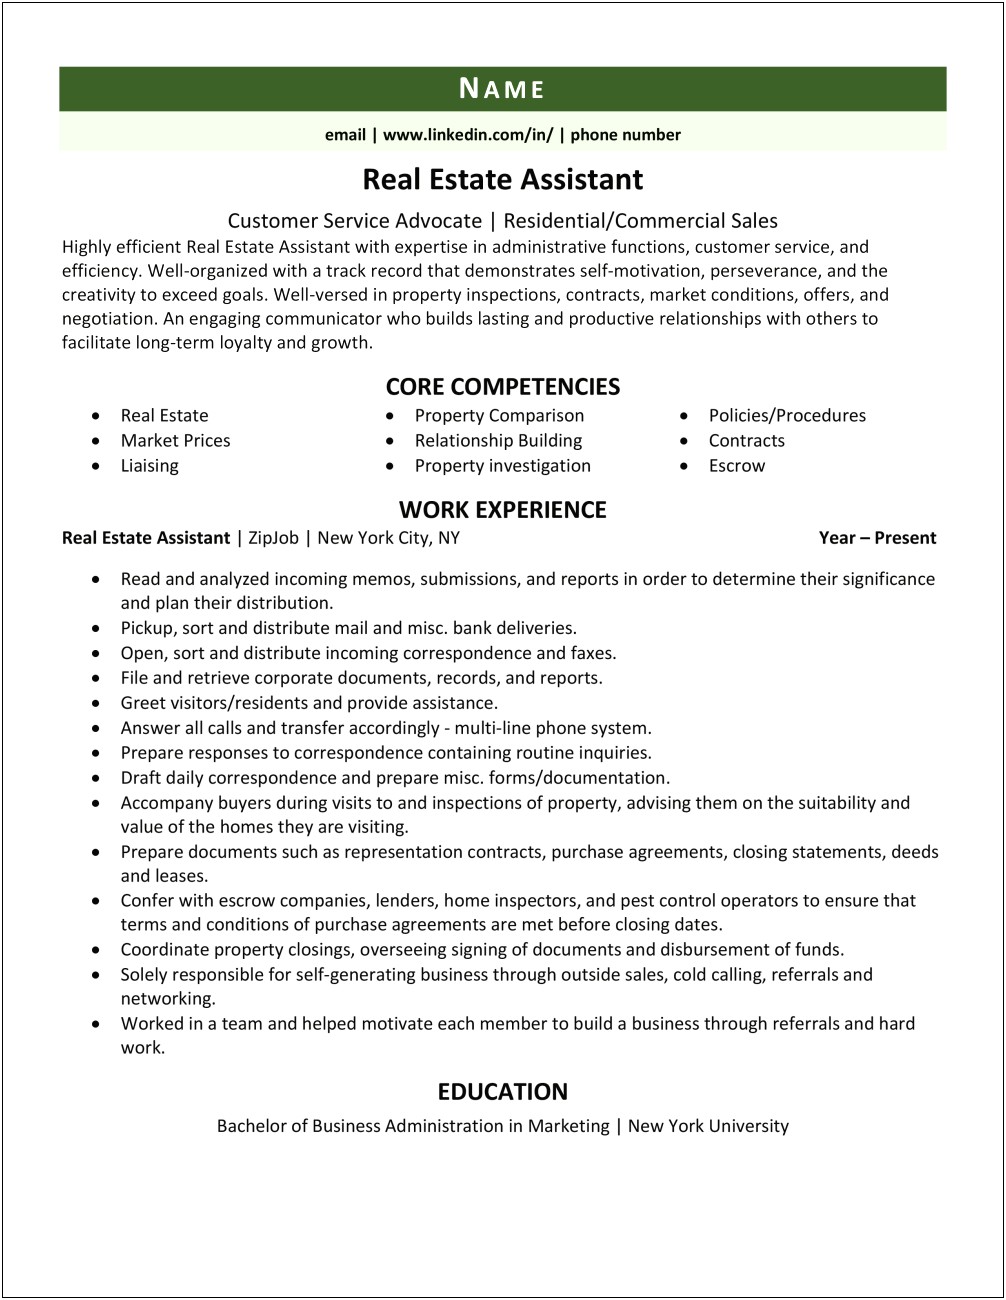 Real Estate Administrative Assistant Resume Summary